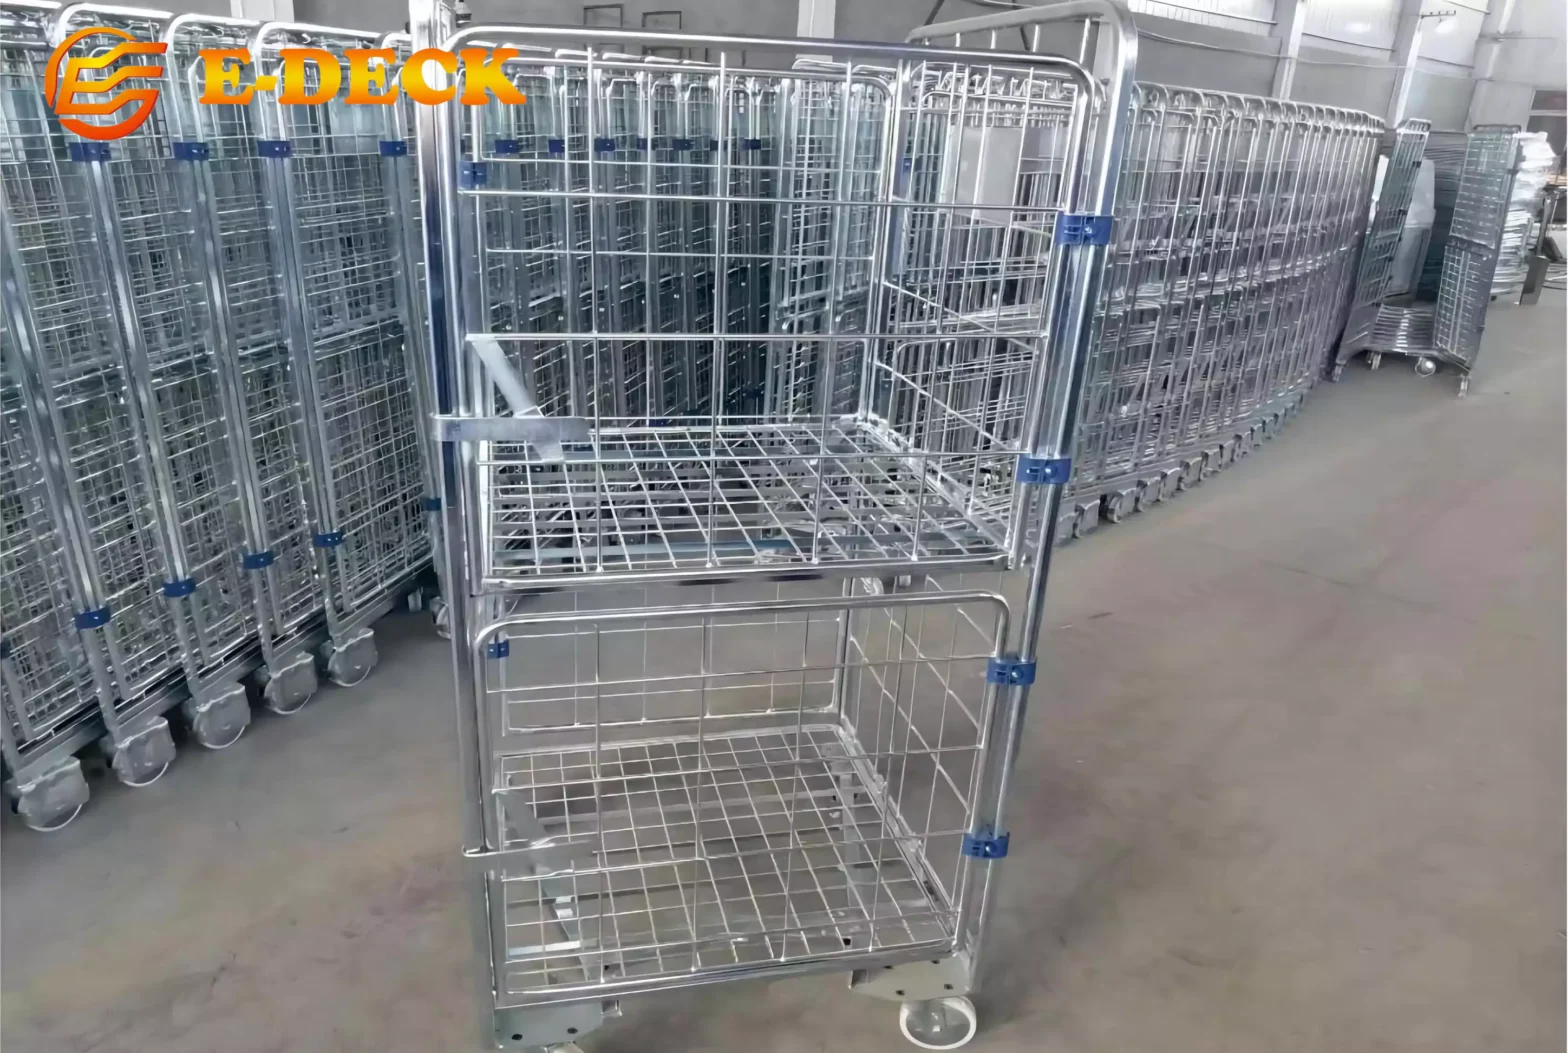 A Cage Trolley Can Make Moving Heavy Loads Easier and Safer